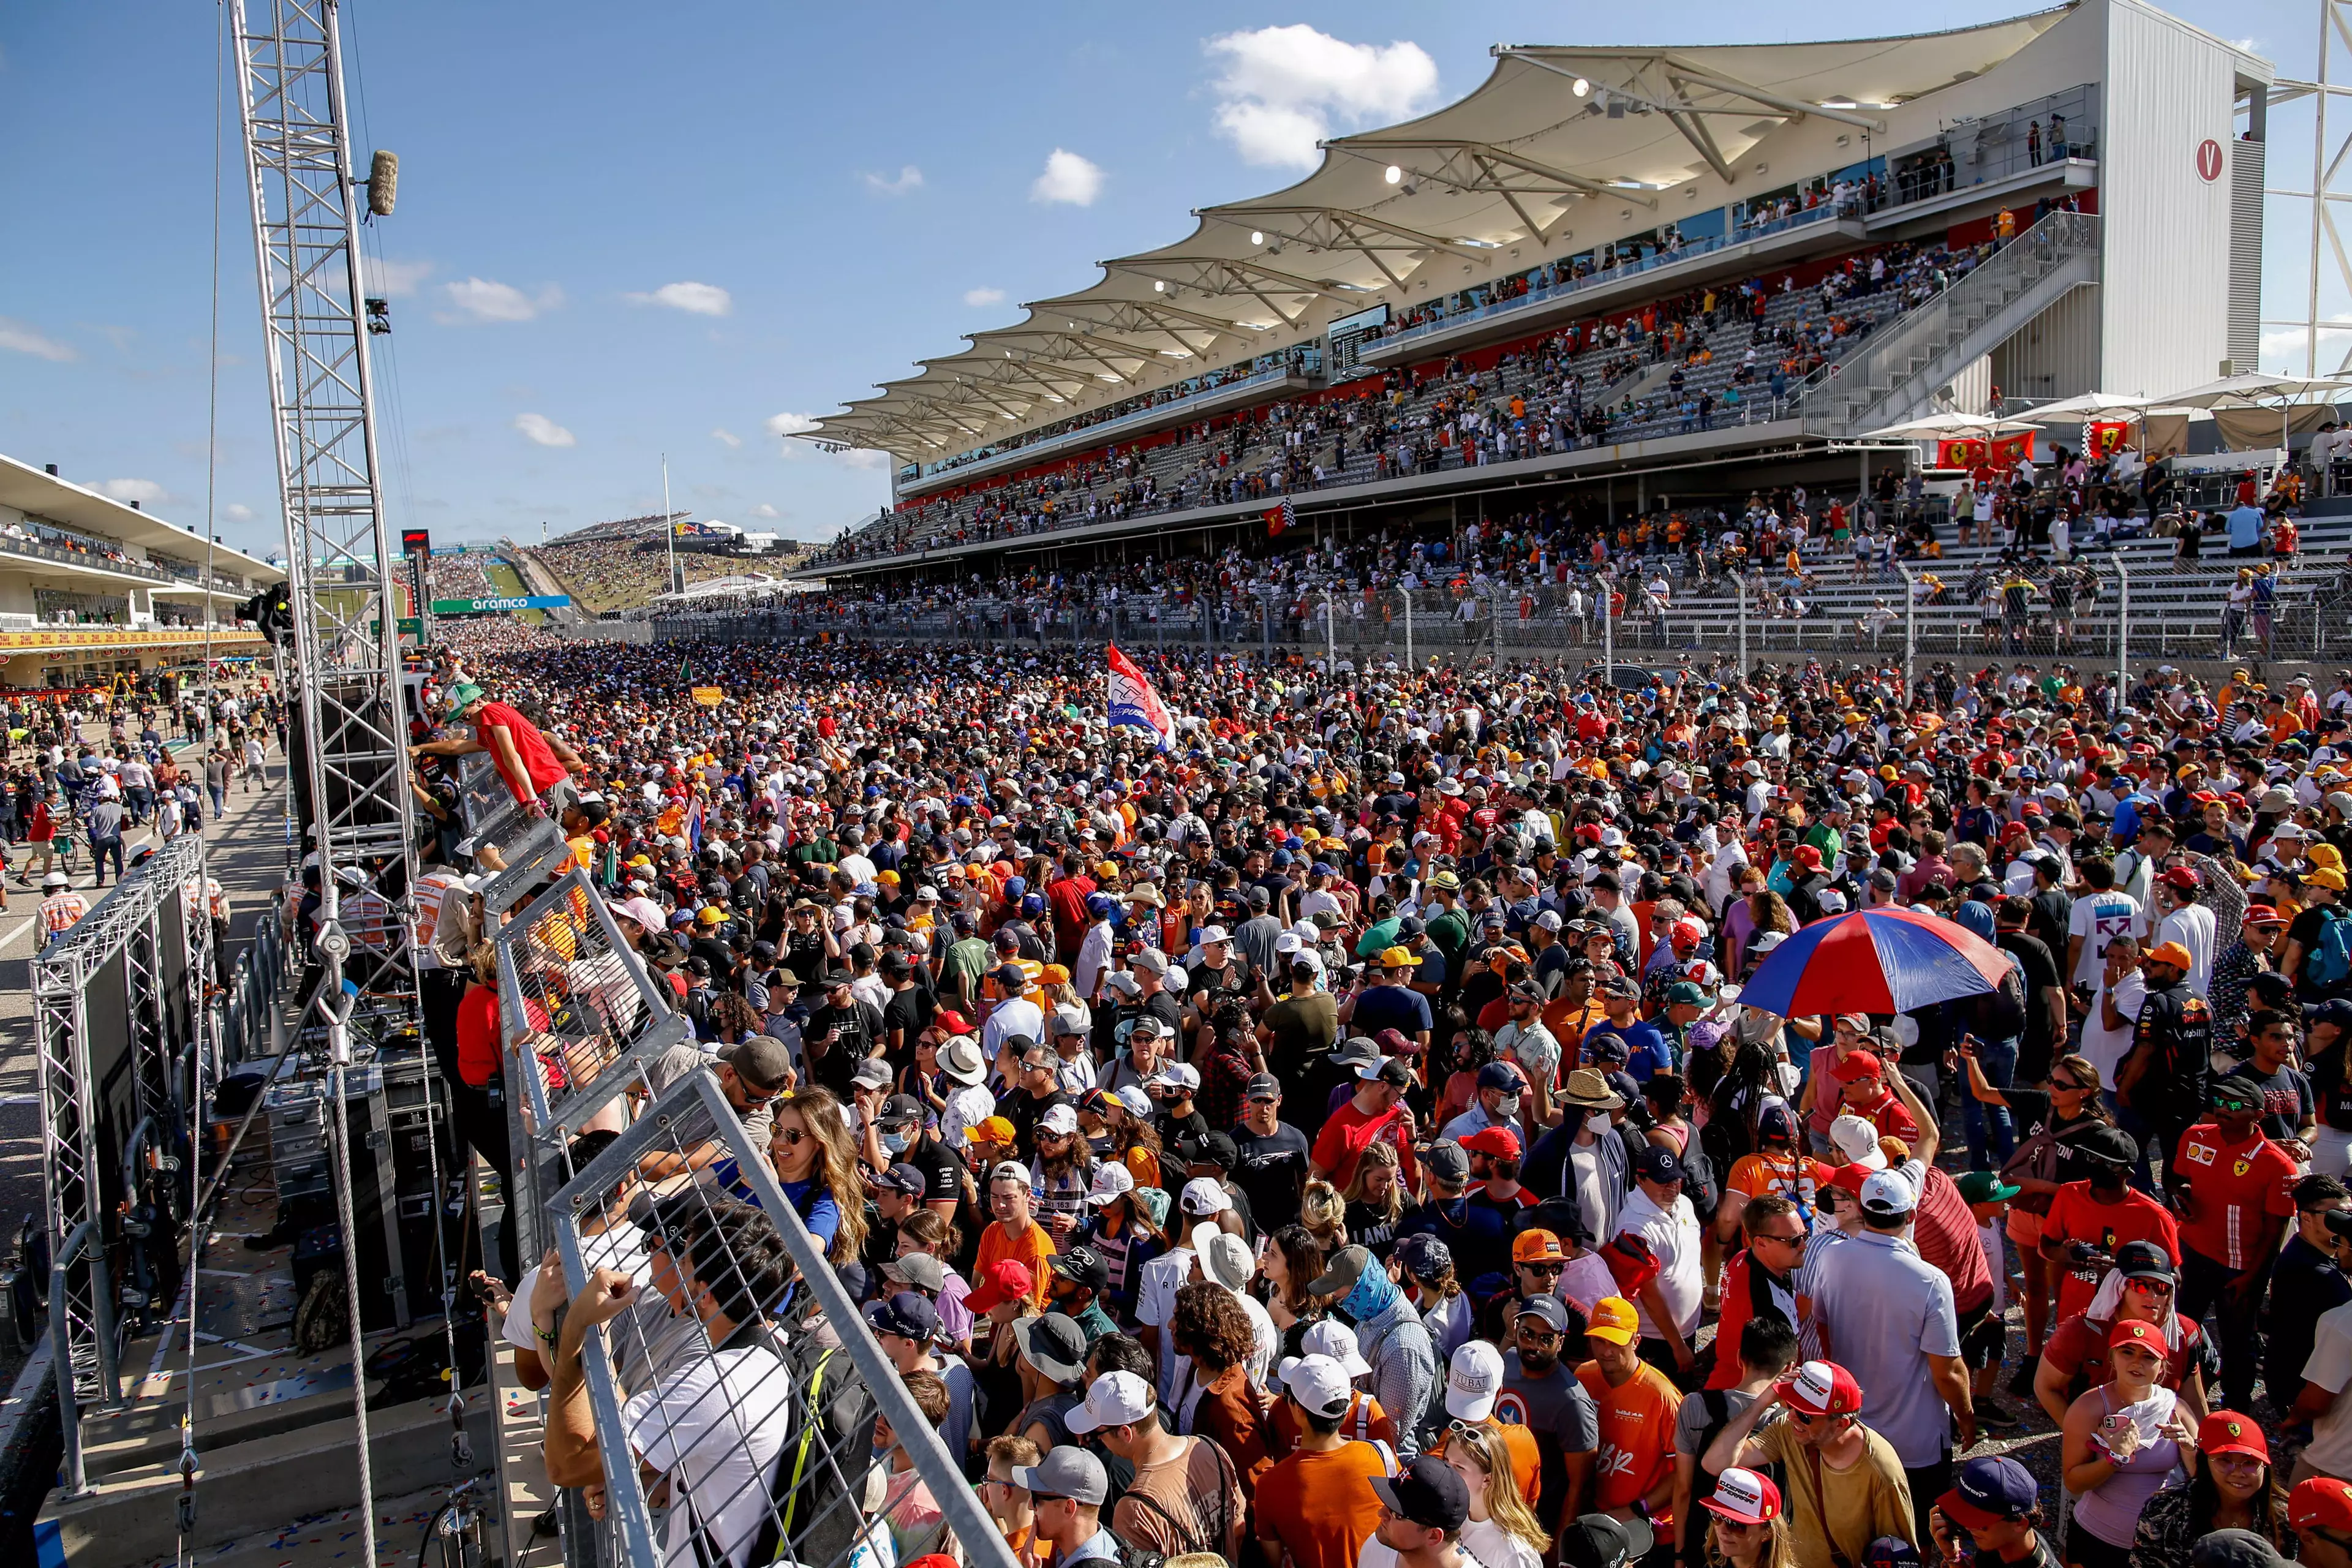 More than 140,000 fans were present to enjoy the United States Grand Prix.